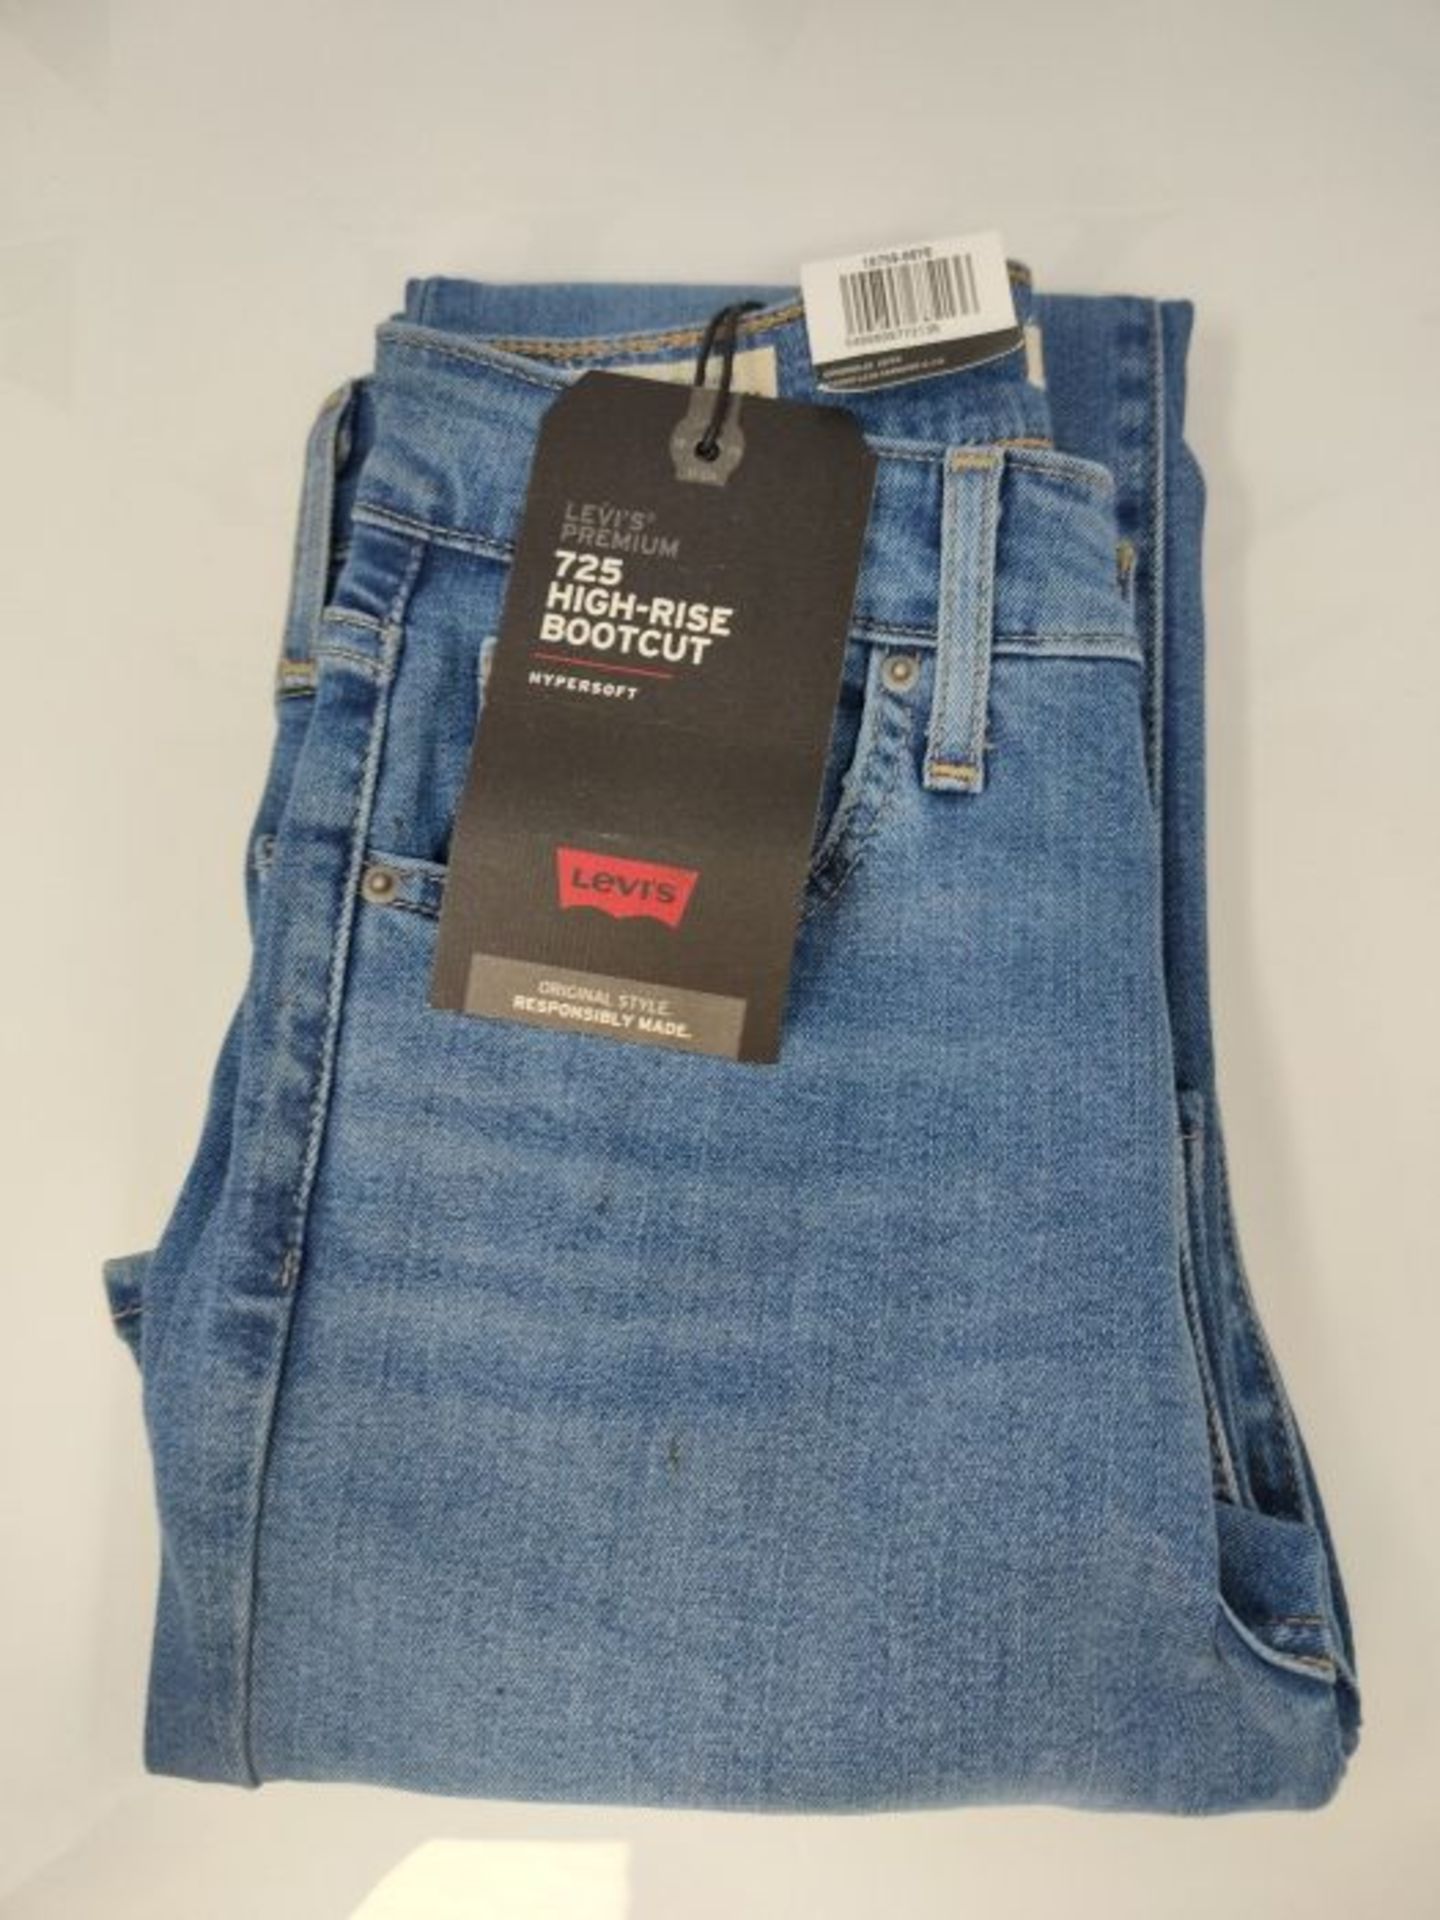 RRP £69.00 Levi's 725 High Rise Bootcut Jeans, Rio Rave, 25W / 30L Donna - Image 2 of 2